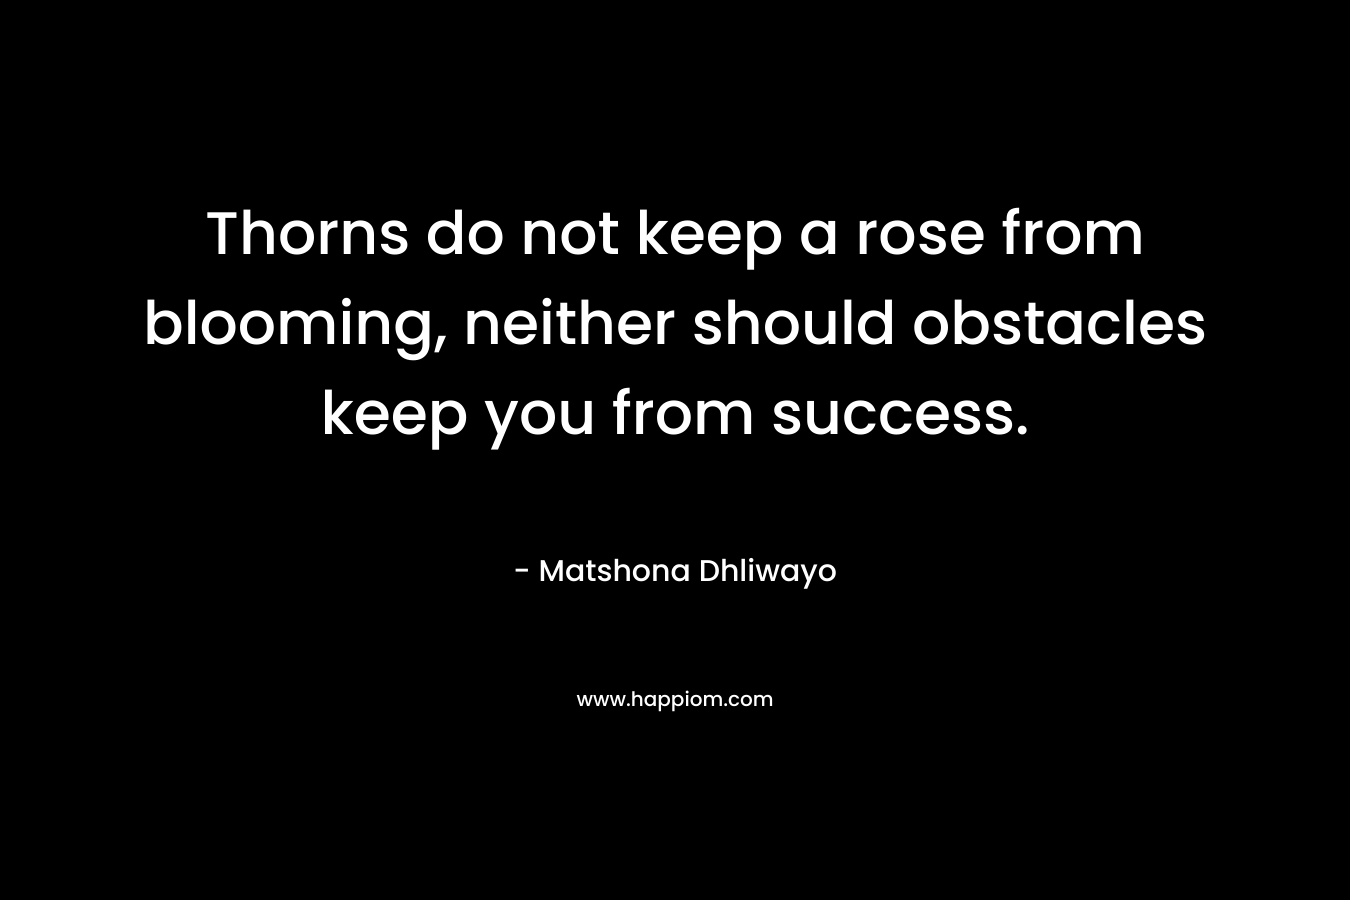 Thorns do not keep a rose from blooming, neither should obstacles keep you from success.